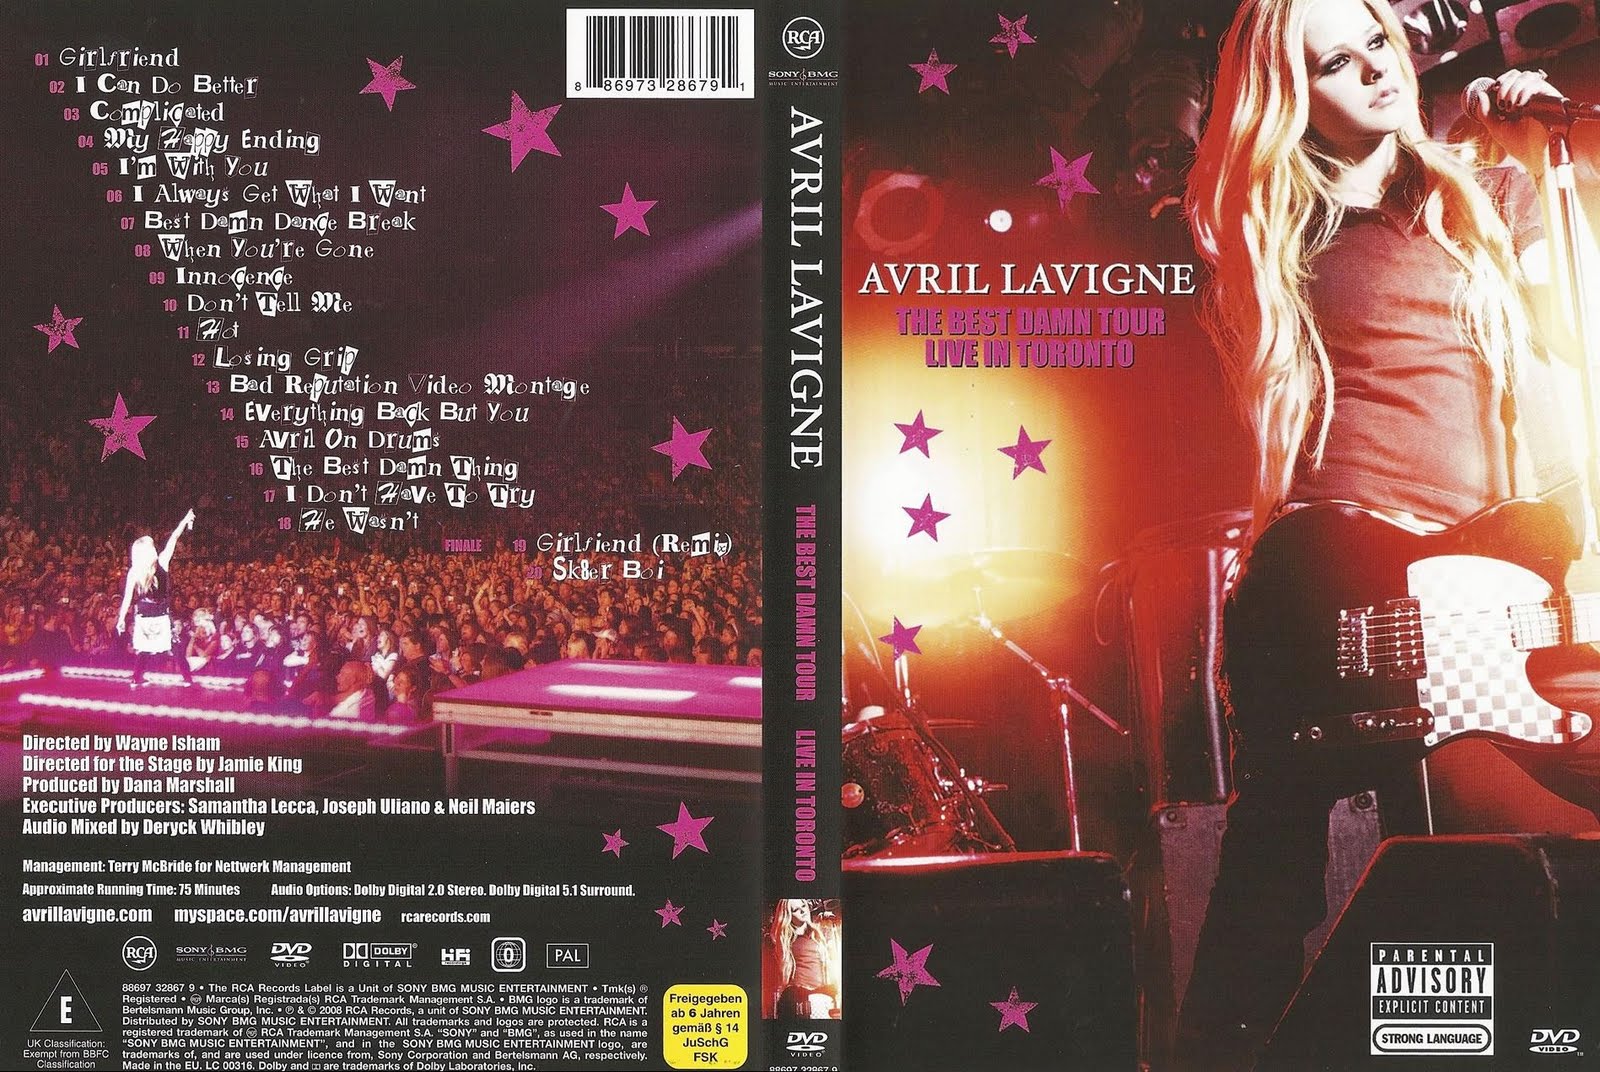 The best ending. Аврил Лавин 2008. Avril Lavigne the best damn Tour Live in Toronto 2008. Avril Lavigne Tour. Avril Lavigne концерт.